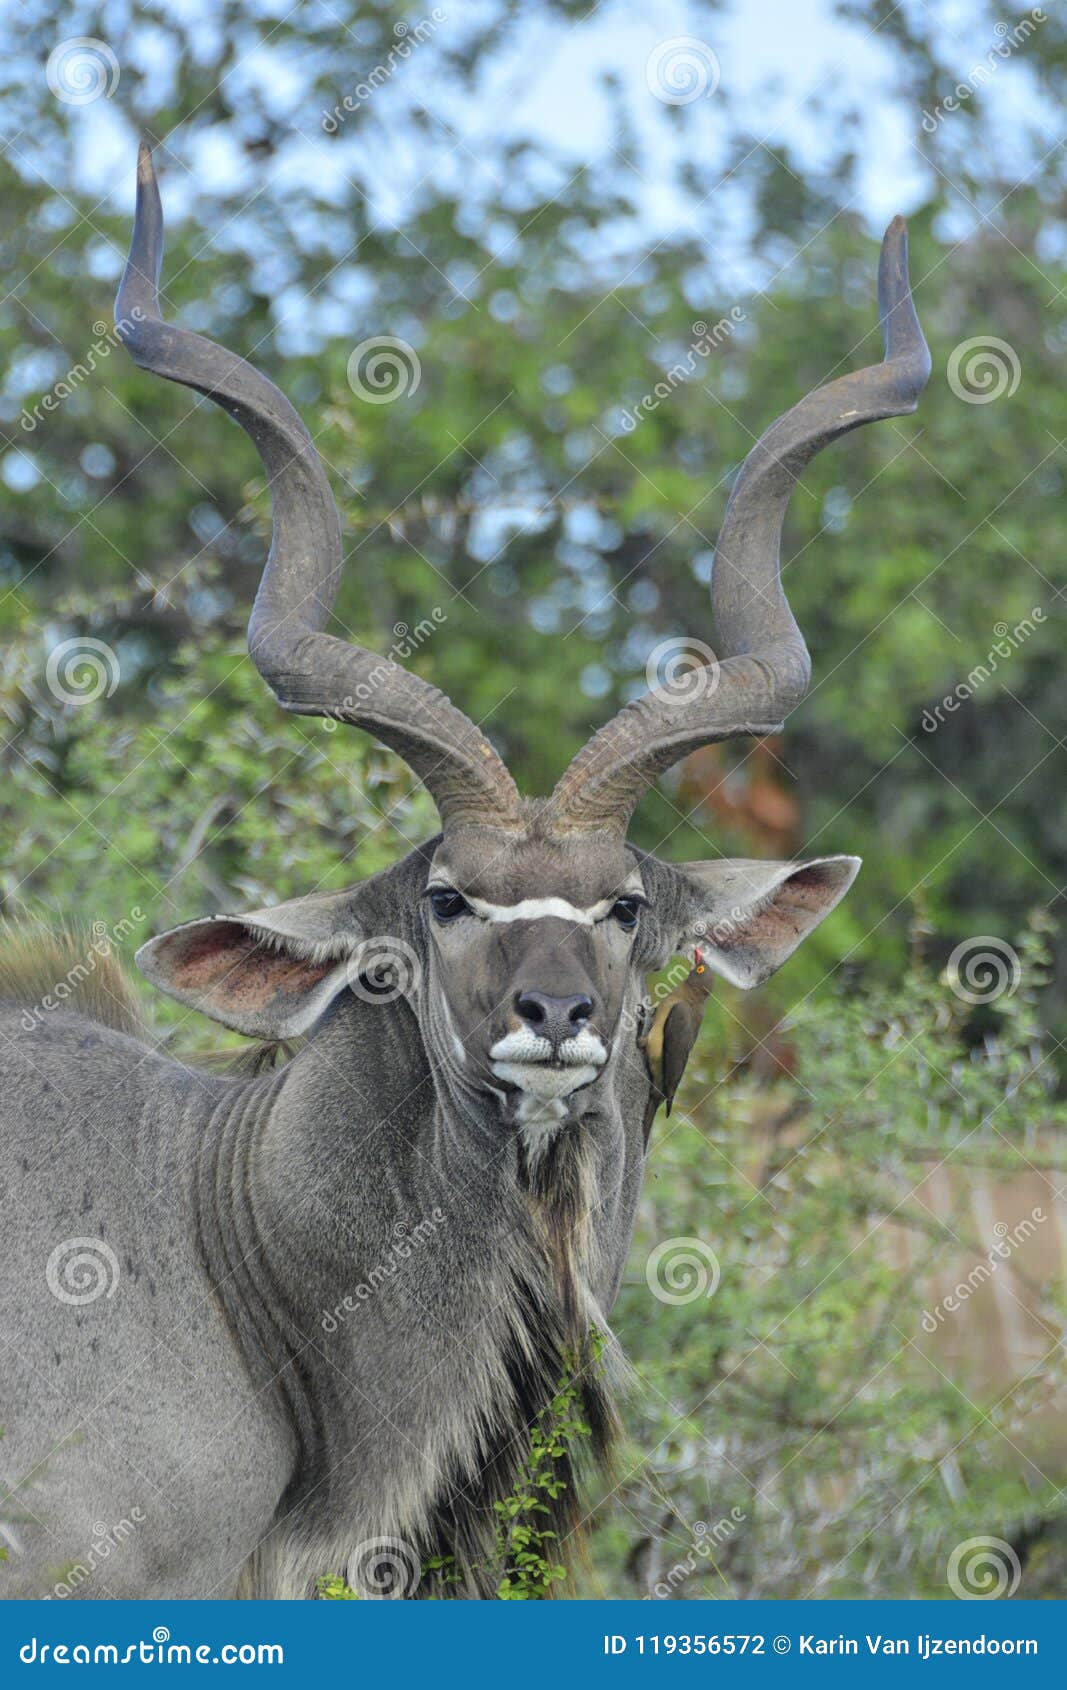 male greater kudu with oxpecker showing impressive horns